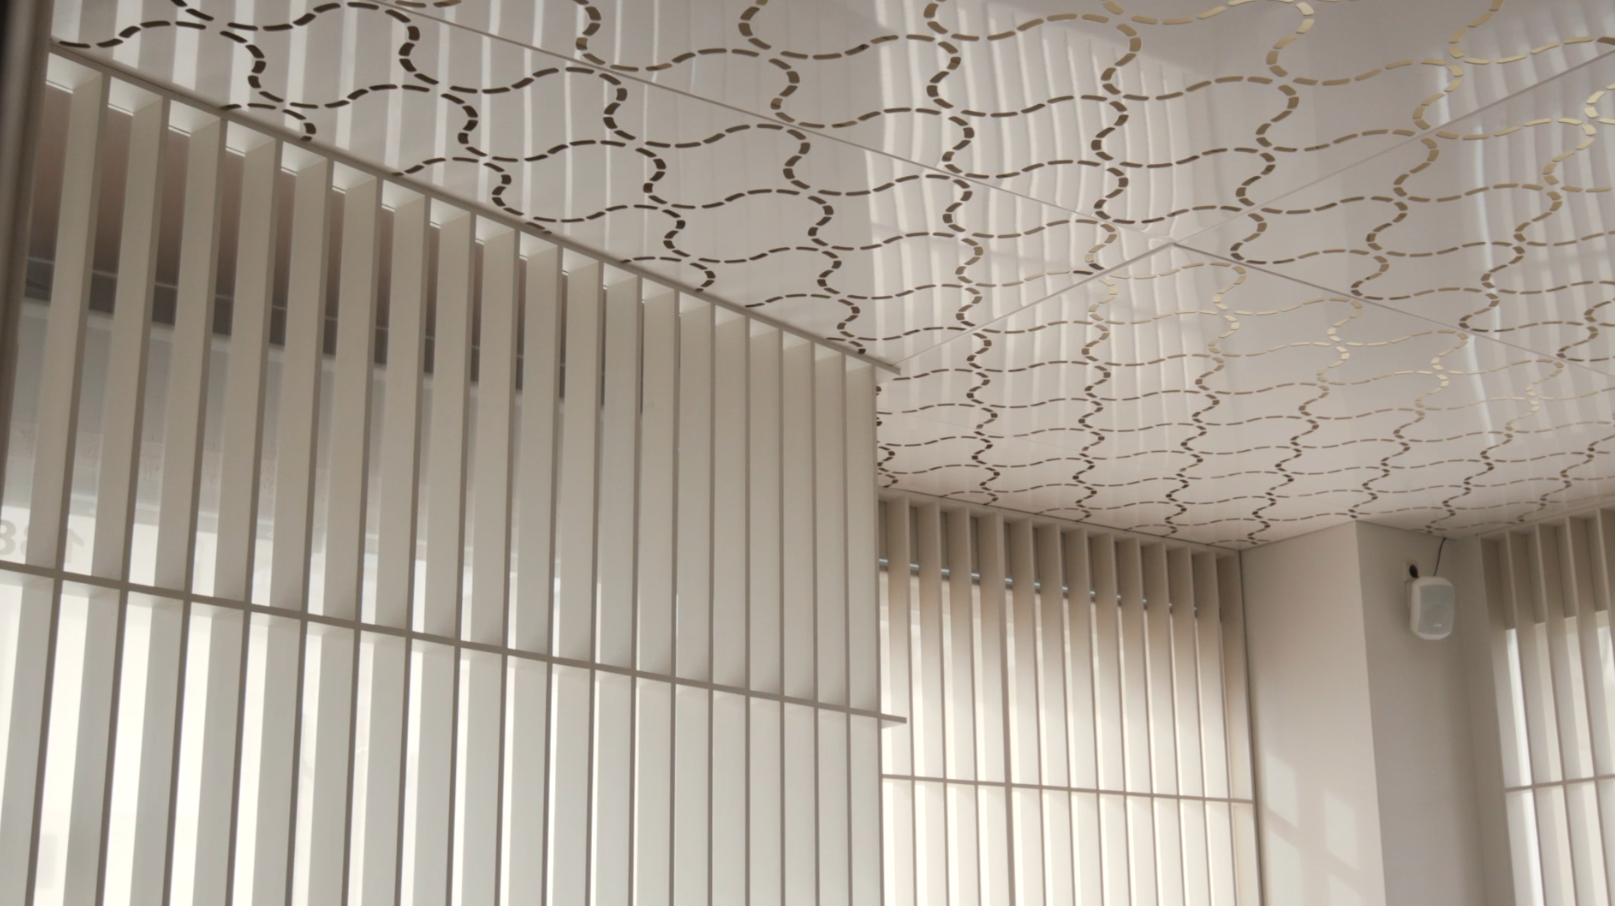 Bplan ceiling covering